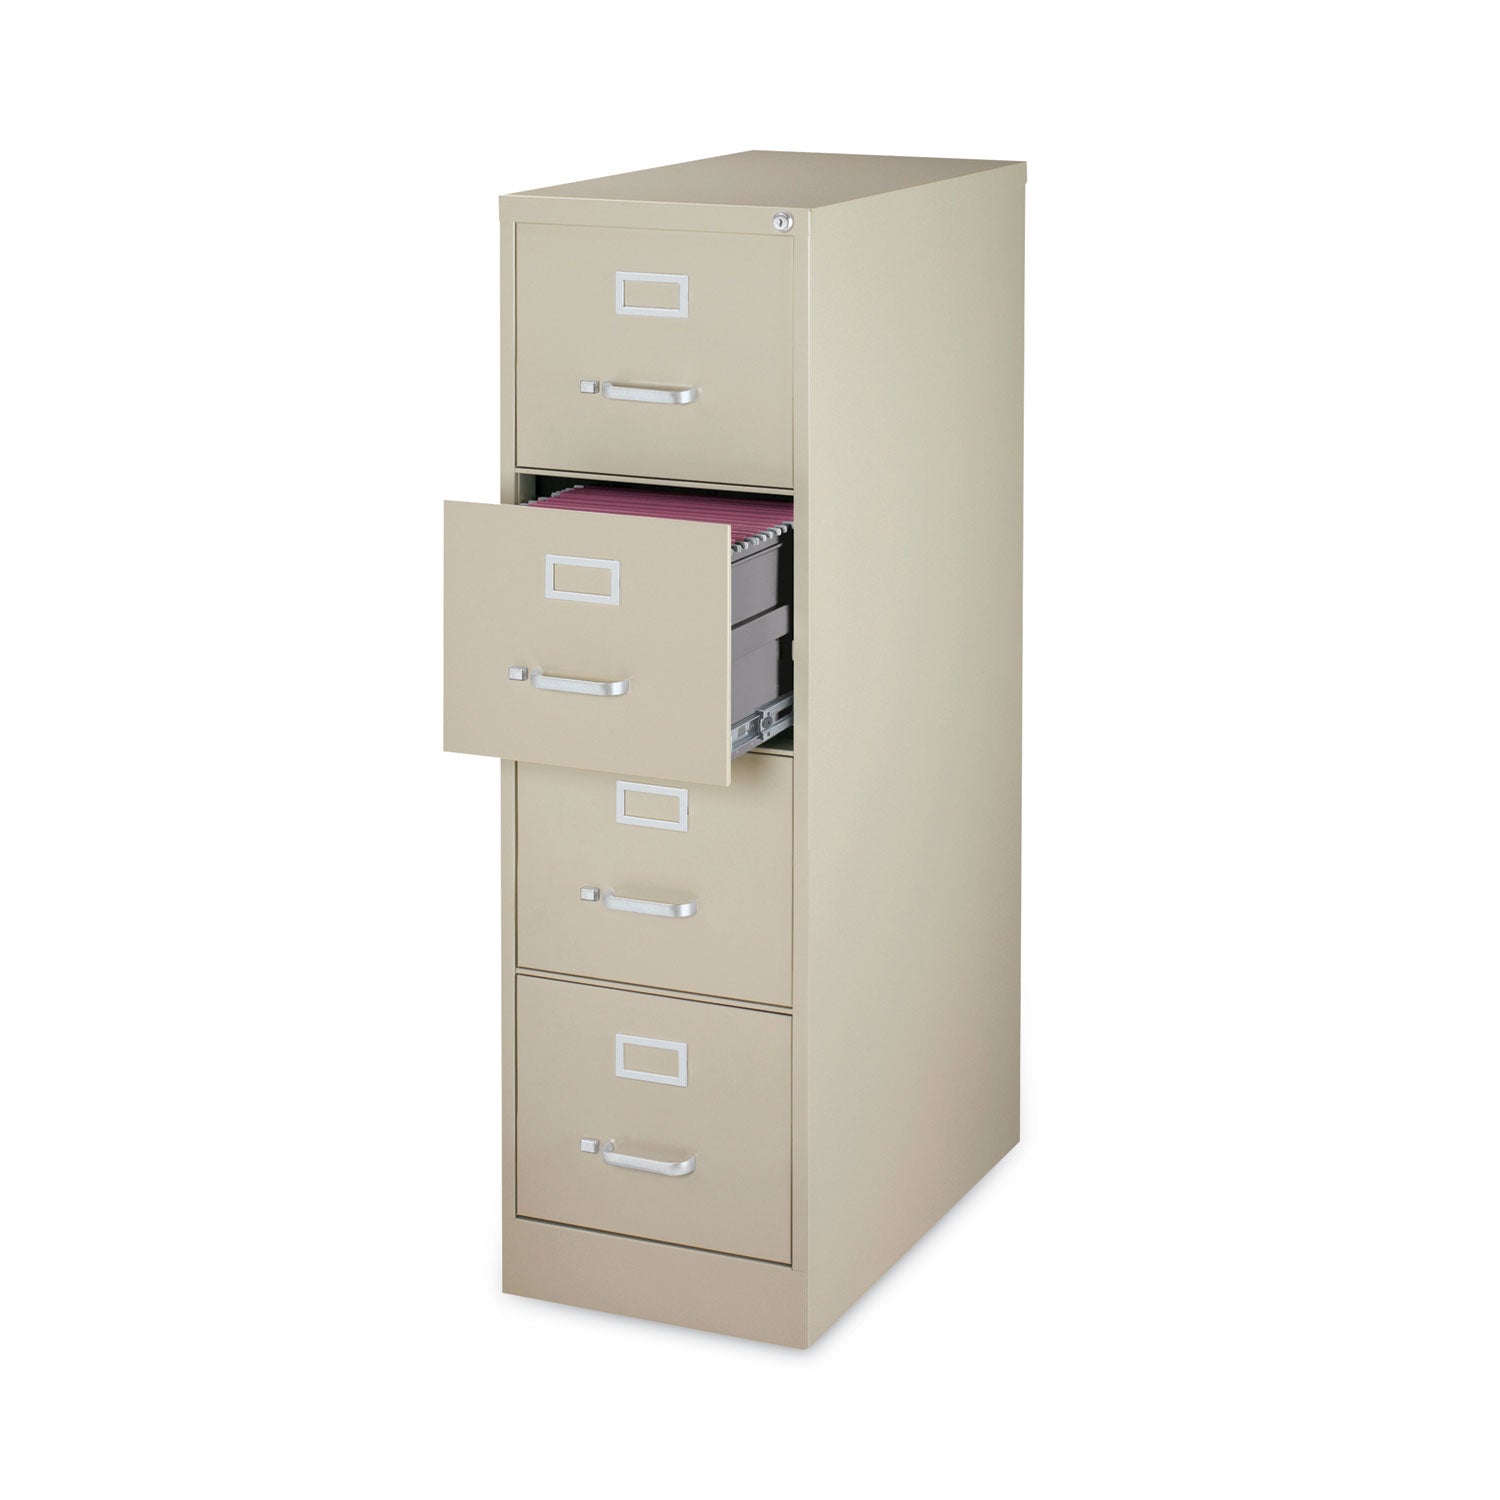 vertical-letter-file-cabinet-4-letter-size-file-drawers-putty-15-x-265-x-52_hid14028 - 4